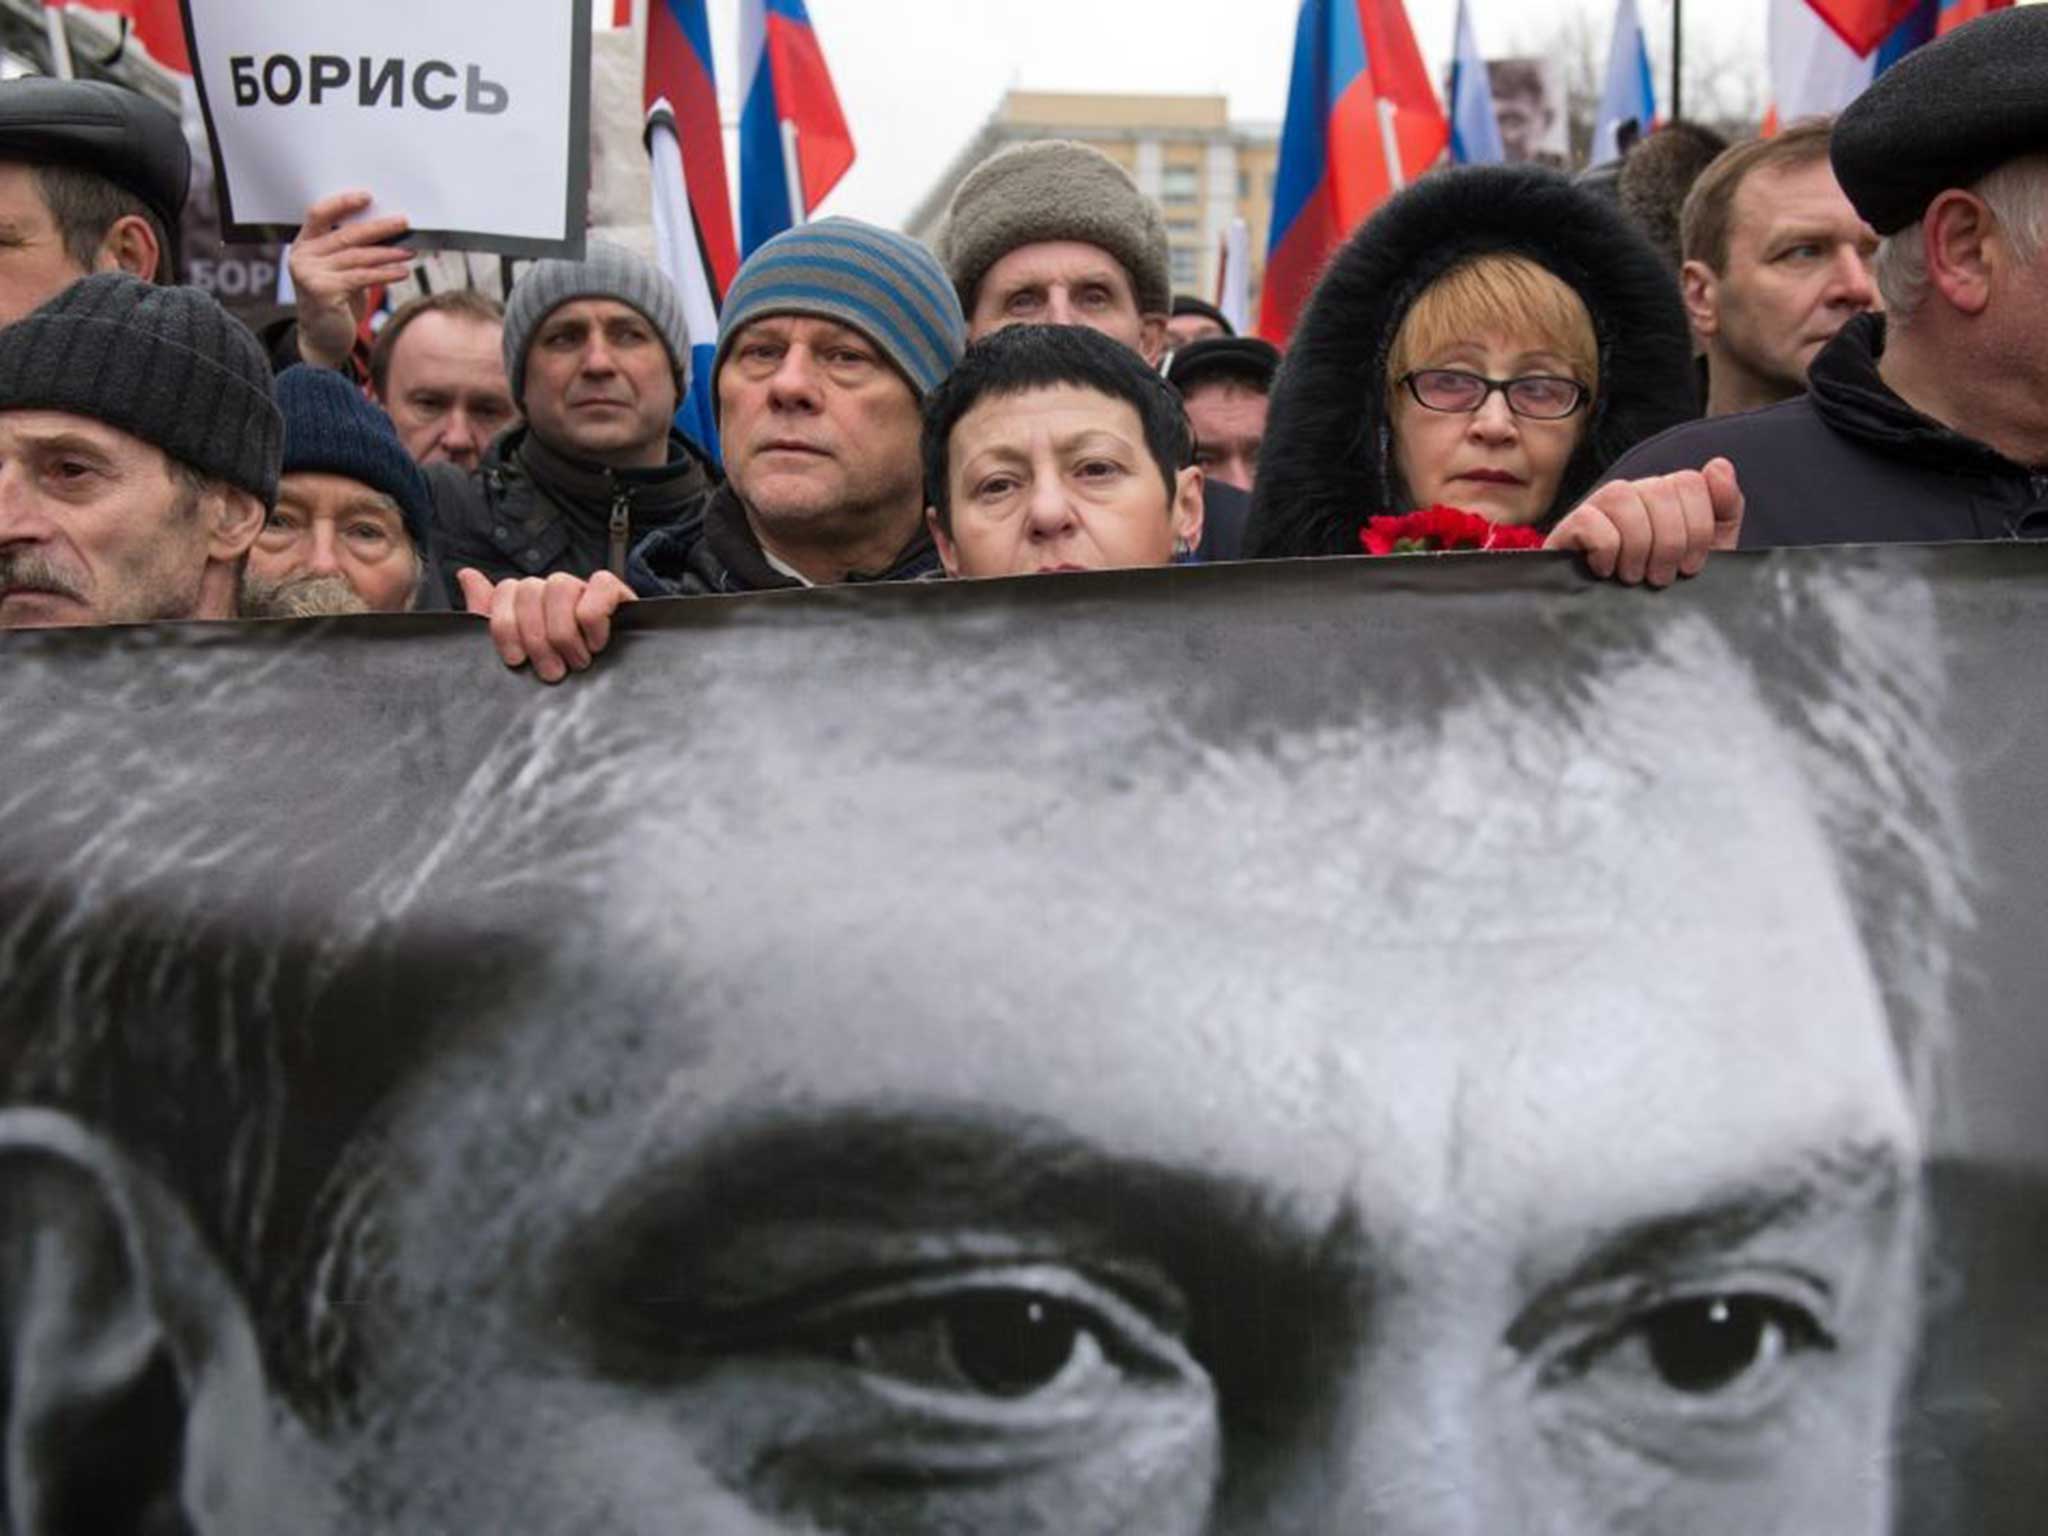 Protesters took to the streets in the days following Boris Nemtsov's murder